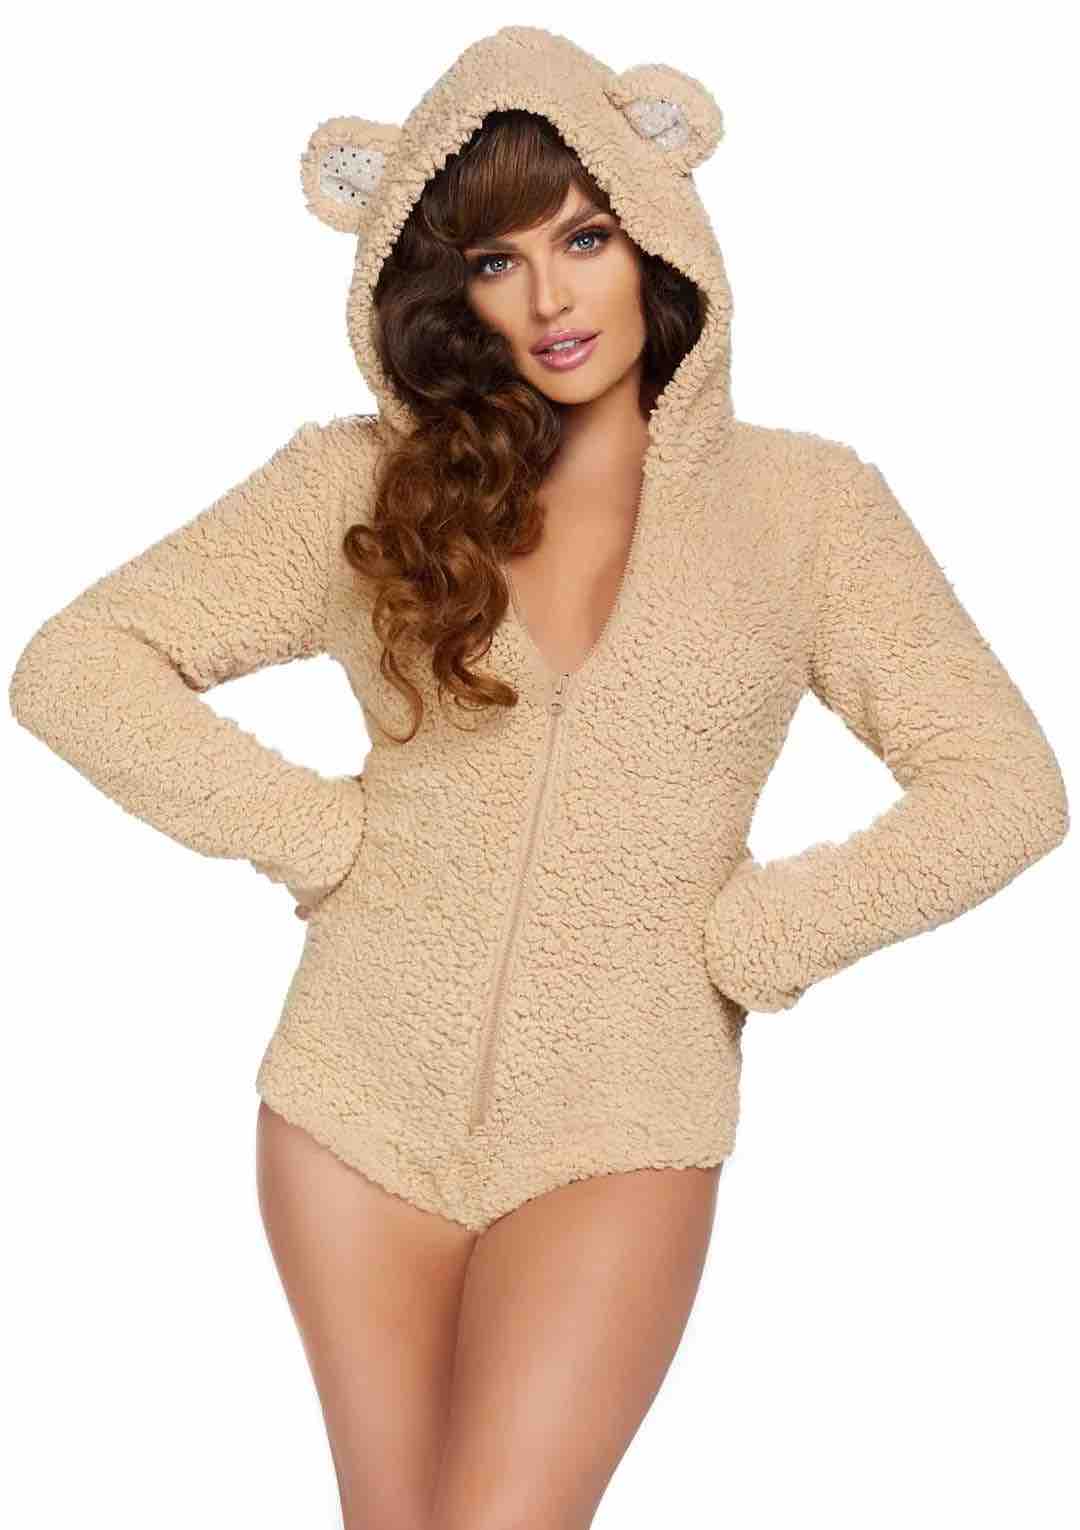 The front of the Cuddle Teddy Onesie.